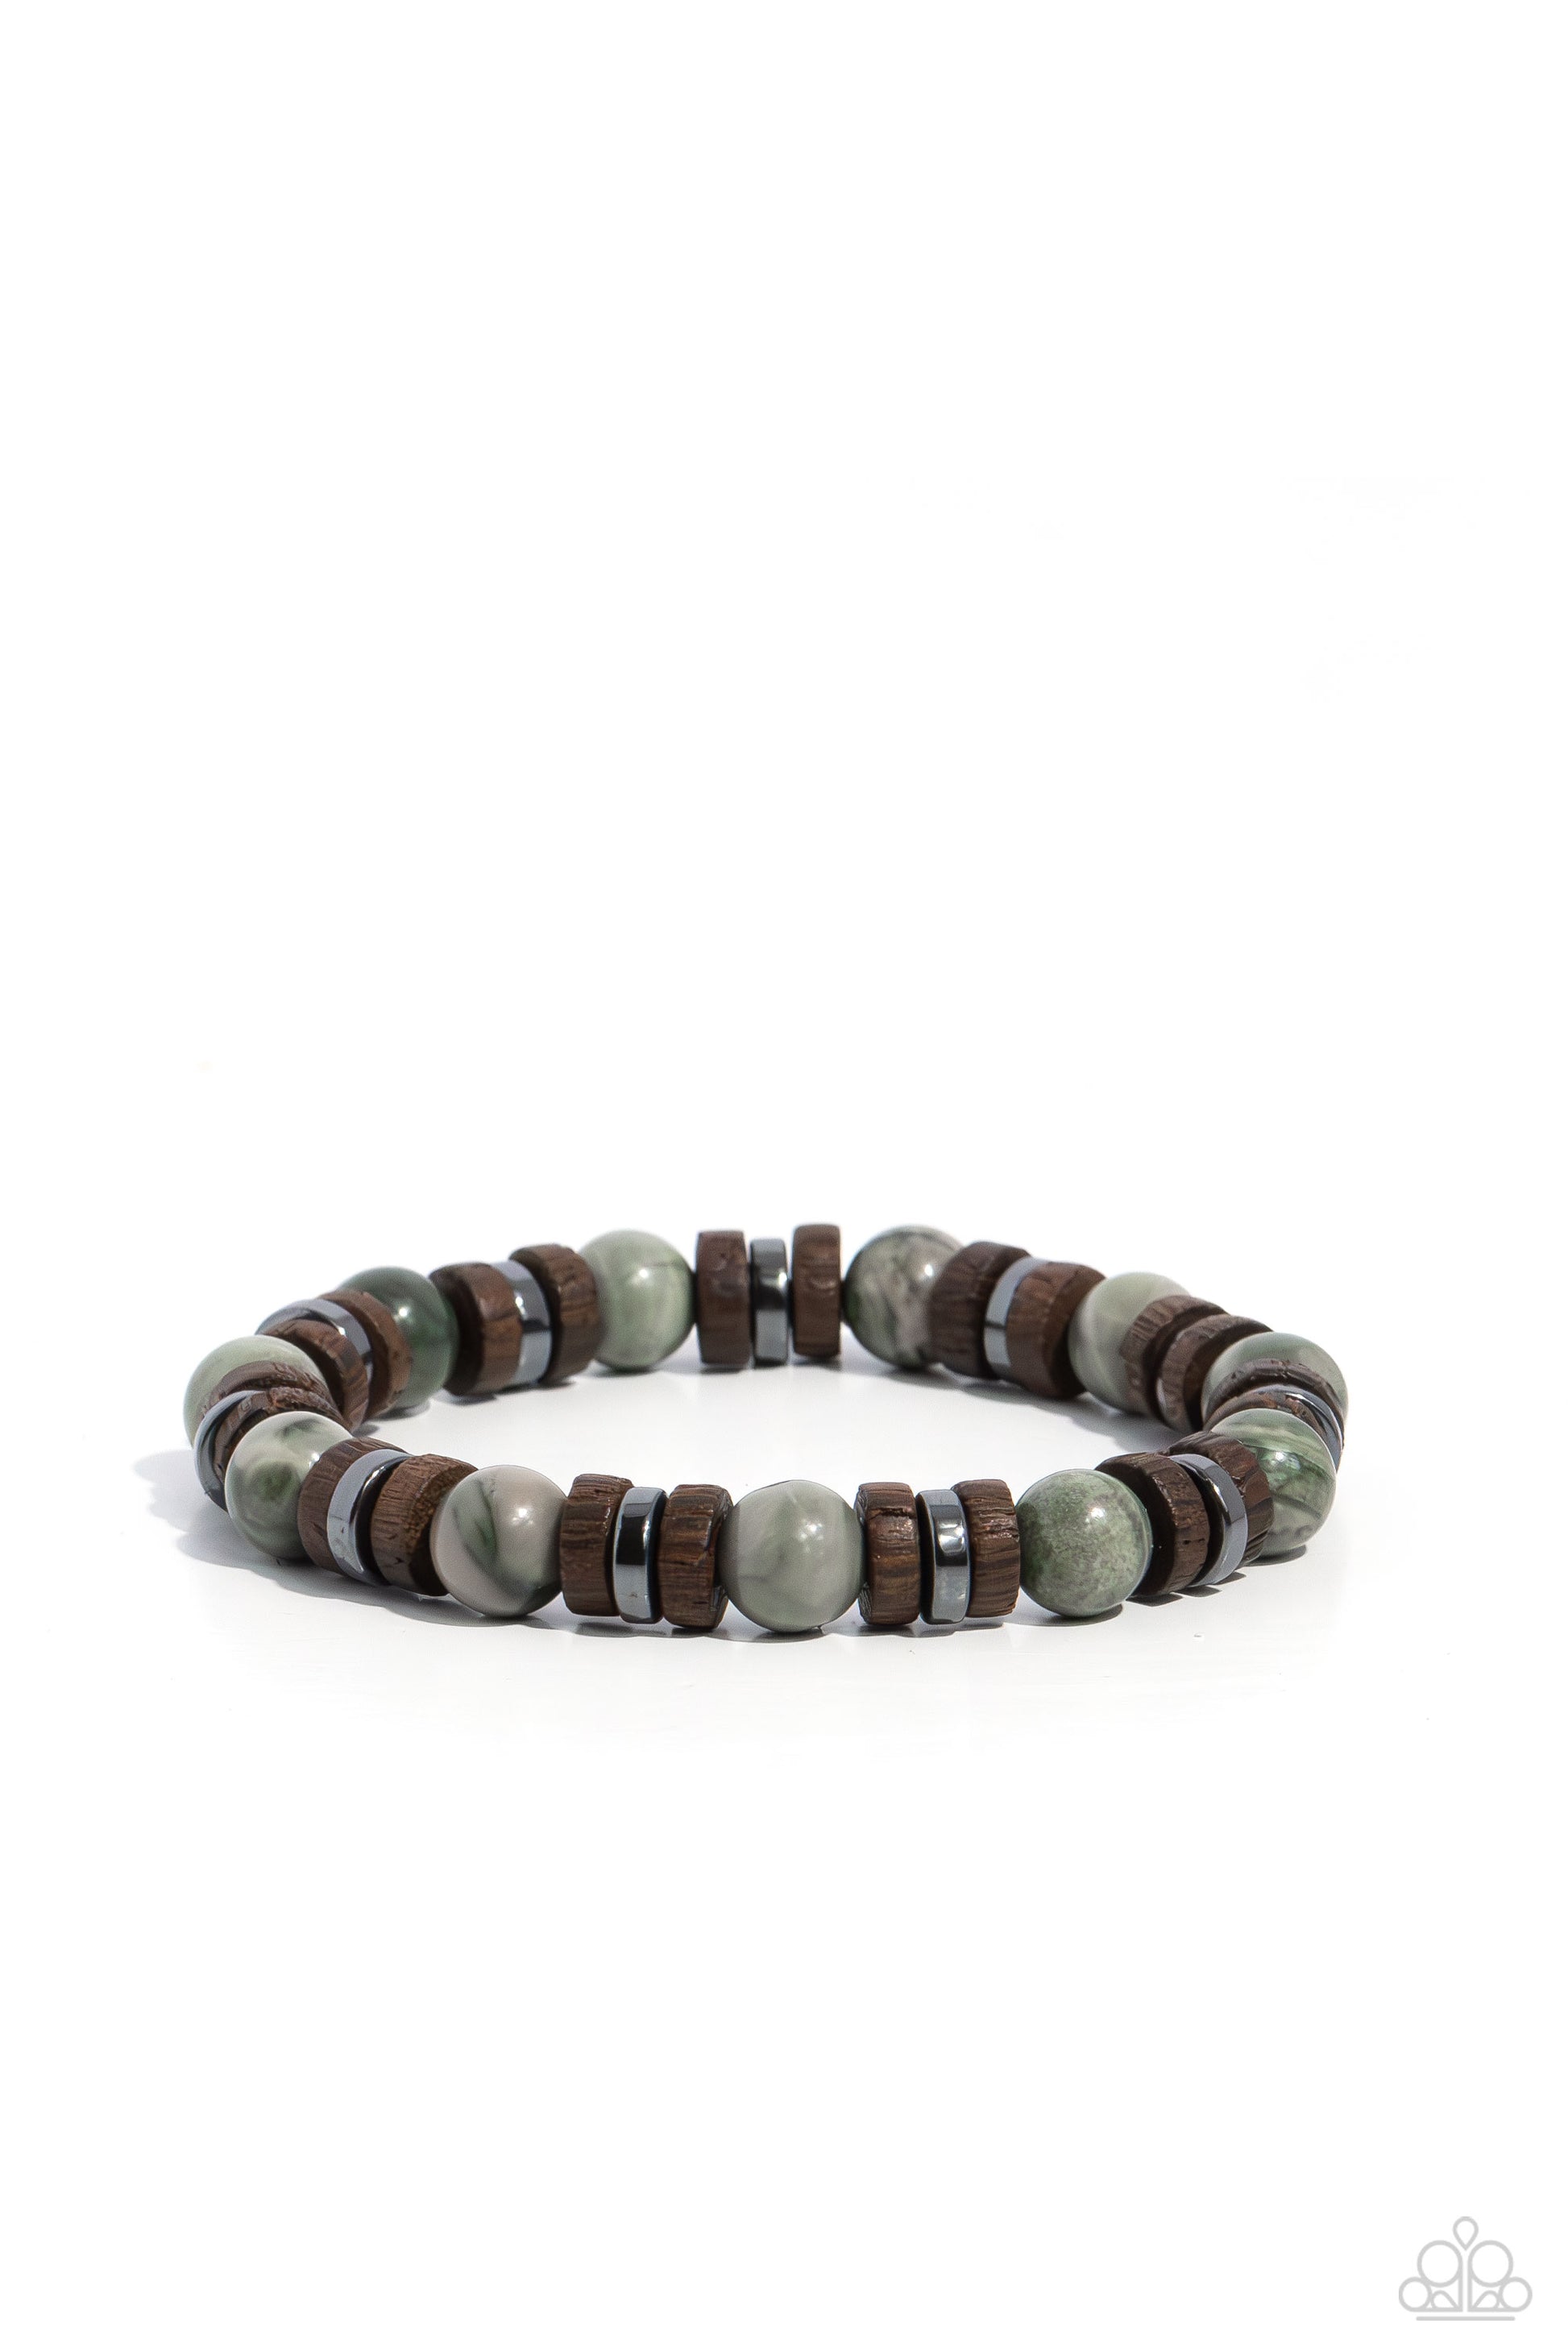 Paparazzi Accessories- Earthy Empath - Green Urban Bracelets a mismatched assortment of green stone beads, brown wooden discs, and gunmetal accents are threaded along stretchy bands around the wrist for an earthy edge. As the stone elements in this piece are natural, some color variation is normal.  Sold as one individual bracelet.